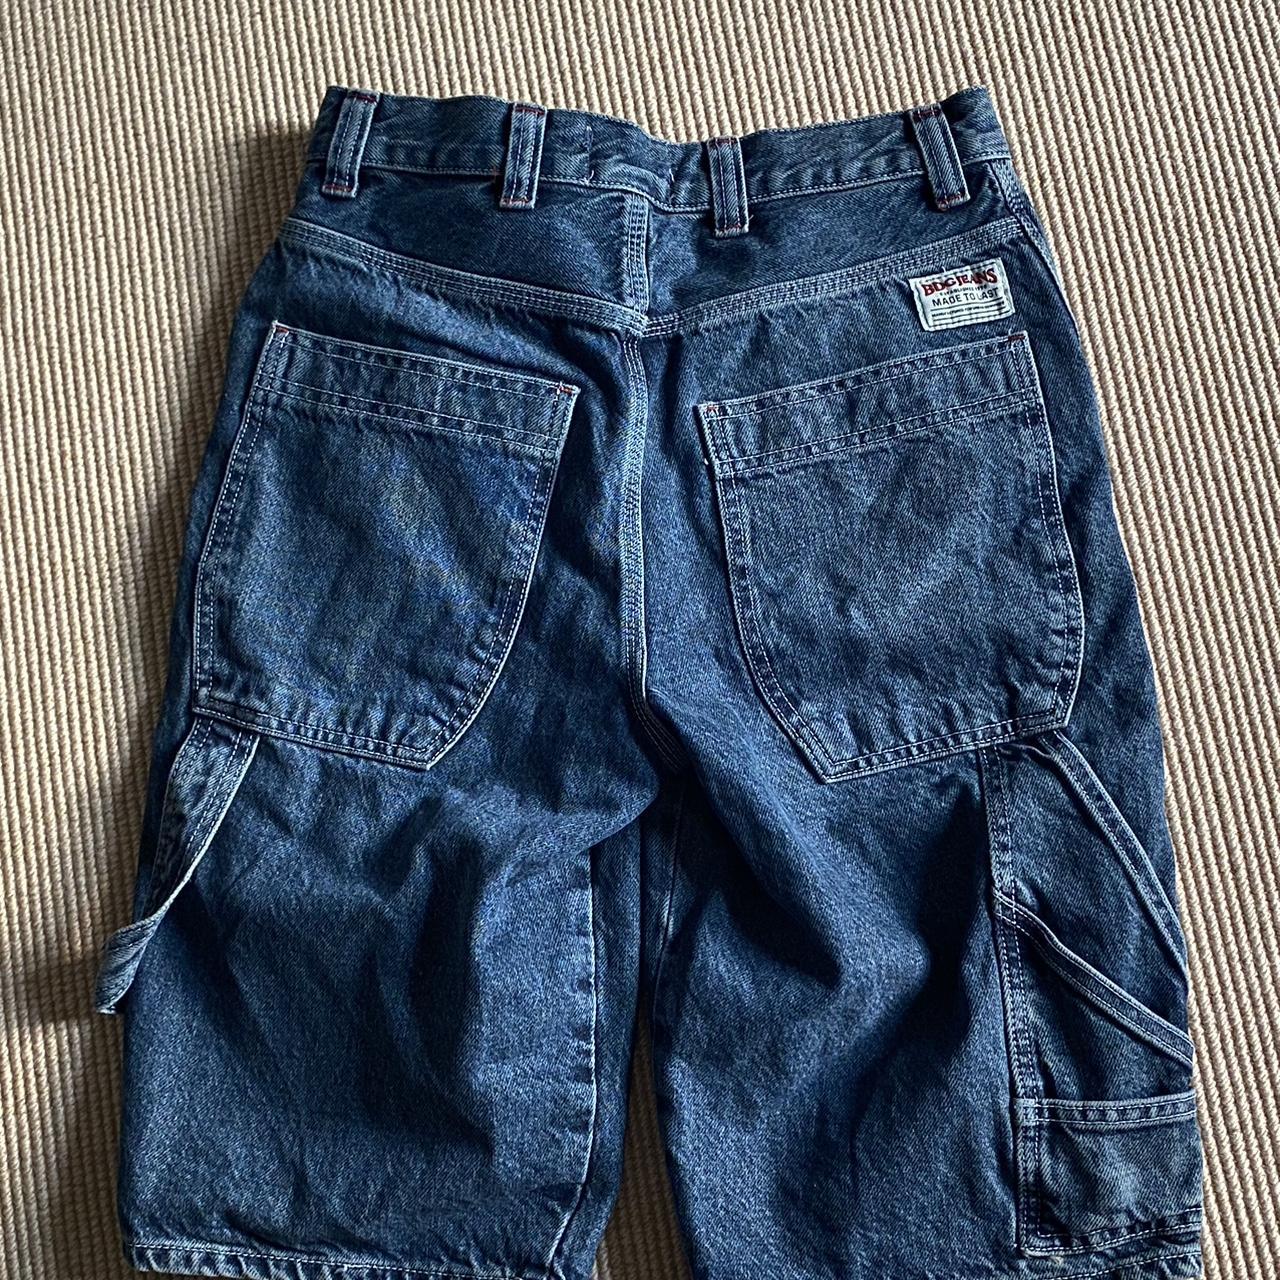 Super trendy BDG Urban Outfitters jorts Only worn... - Depop